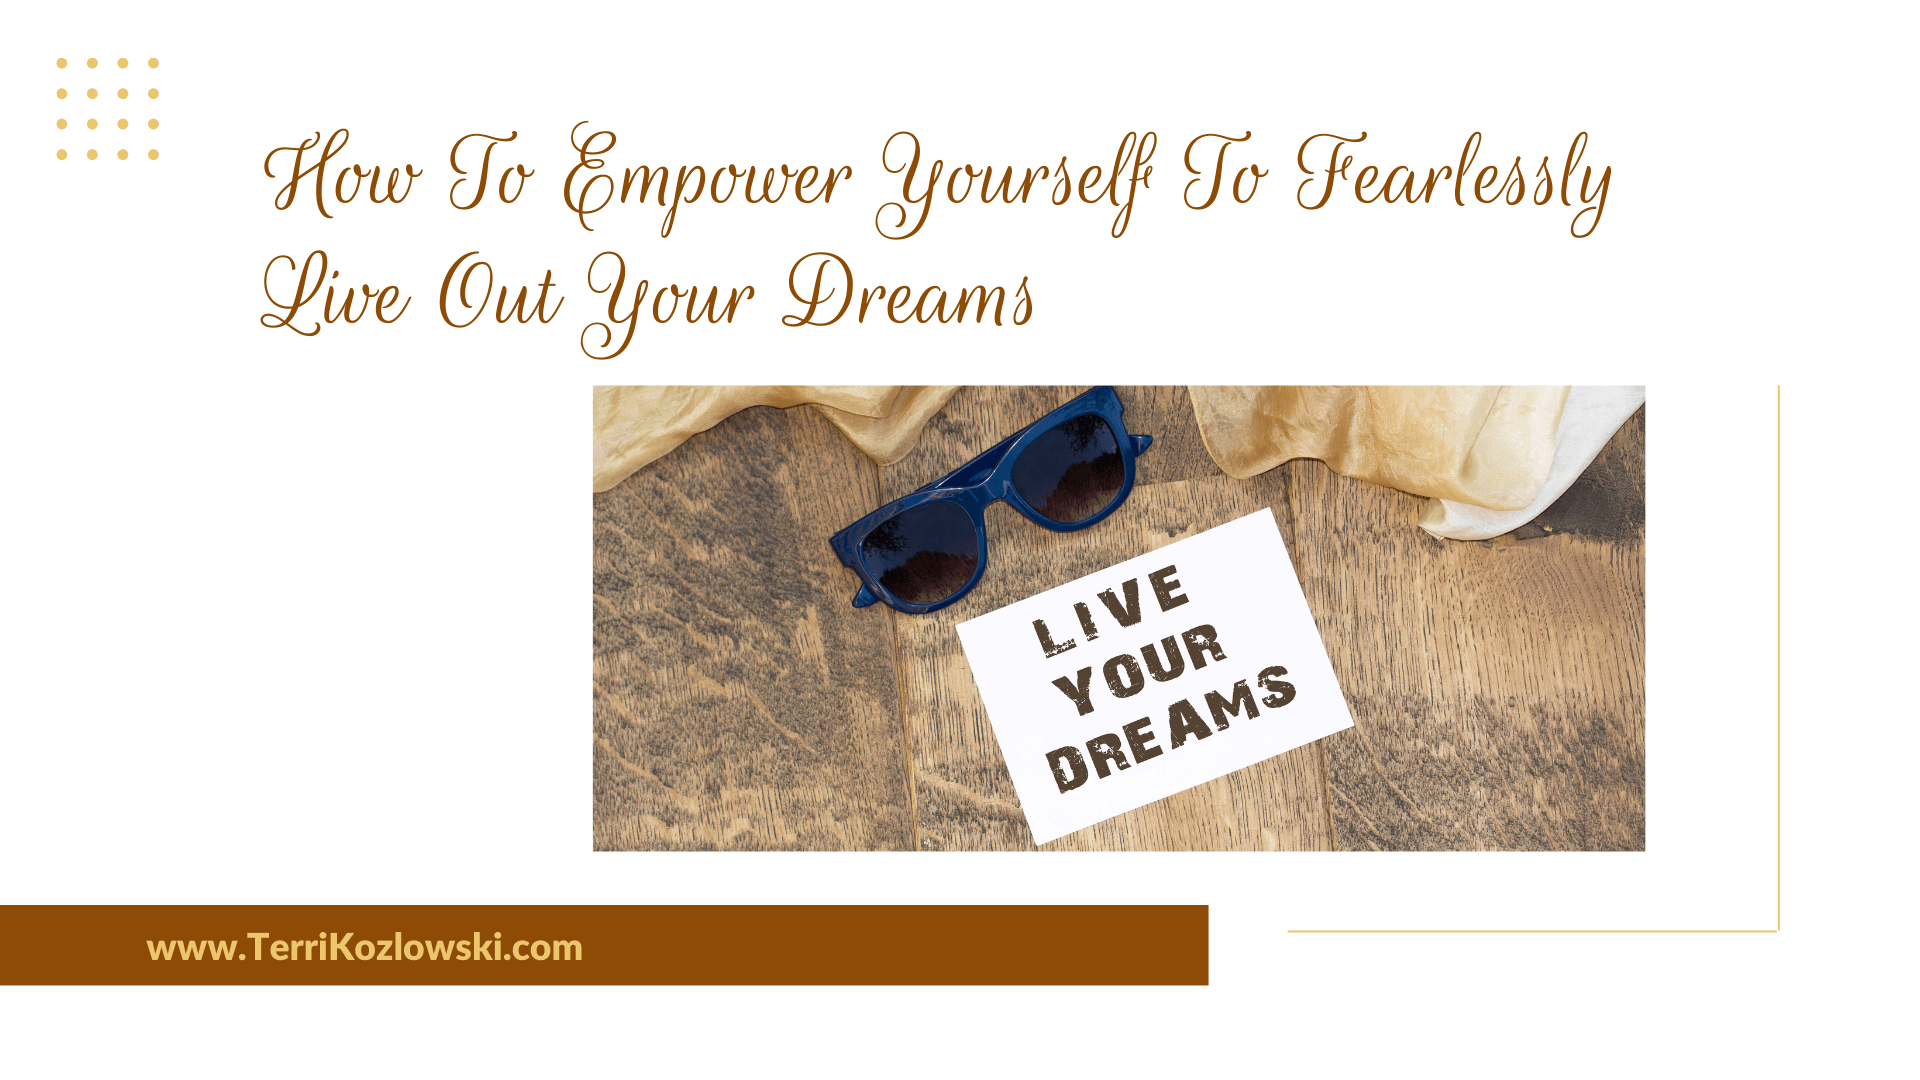 How To Empower Yourself To Fearlessly Live Out Your Dreams